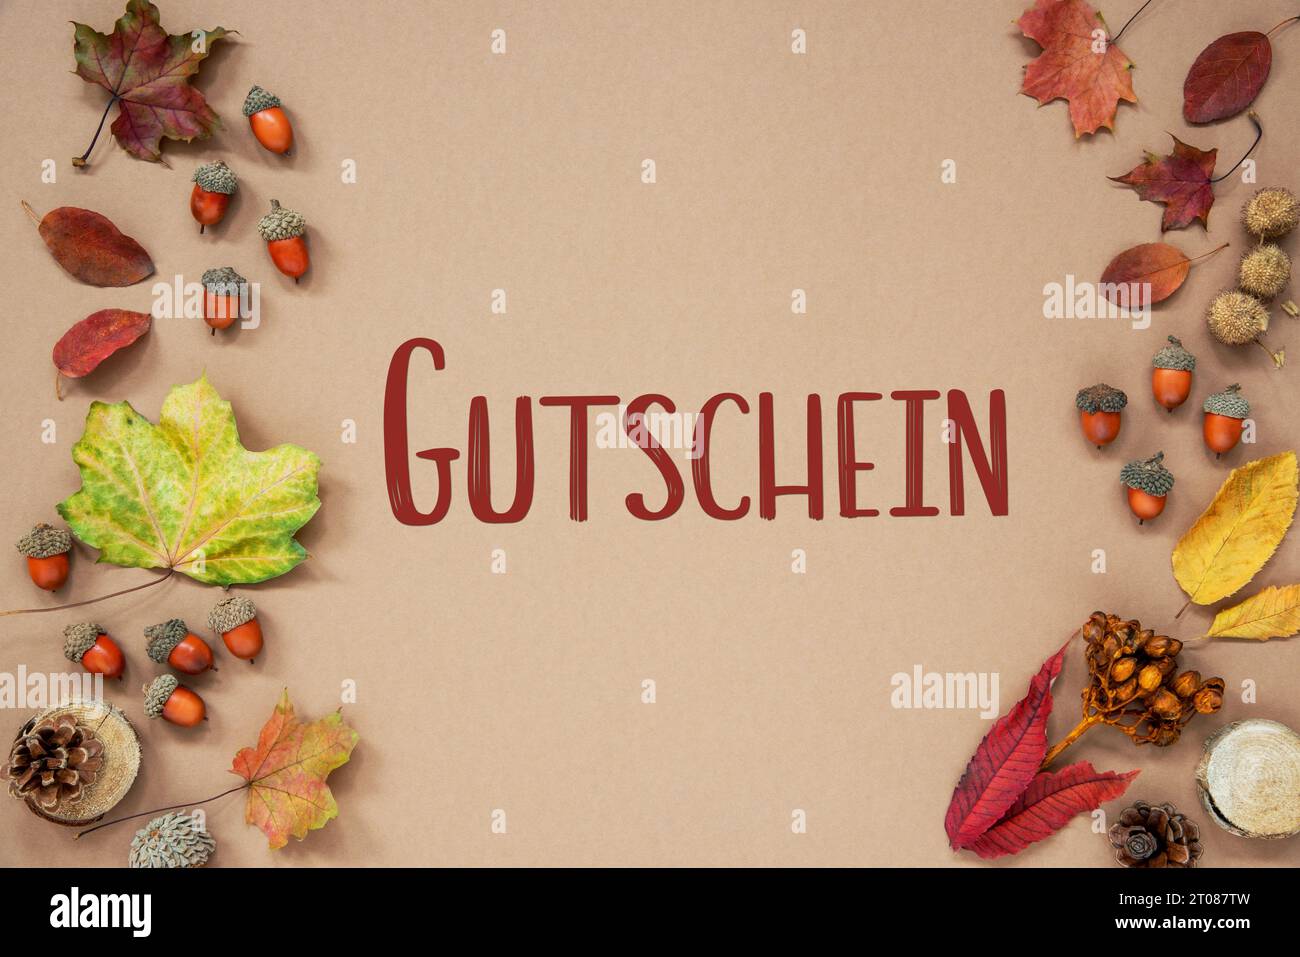 Autumn Background with Autumn Decoration, With Acorns and Fall Leaves and German Text Gutschein, which means Voucher in English Stock Photo